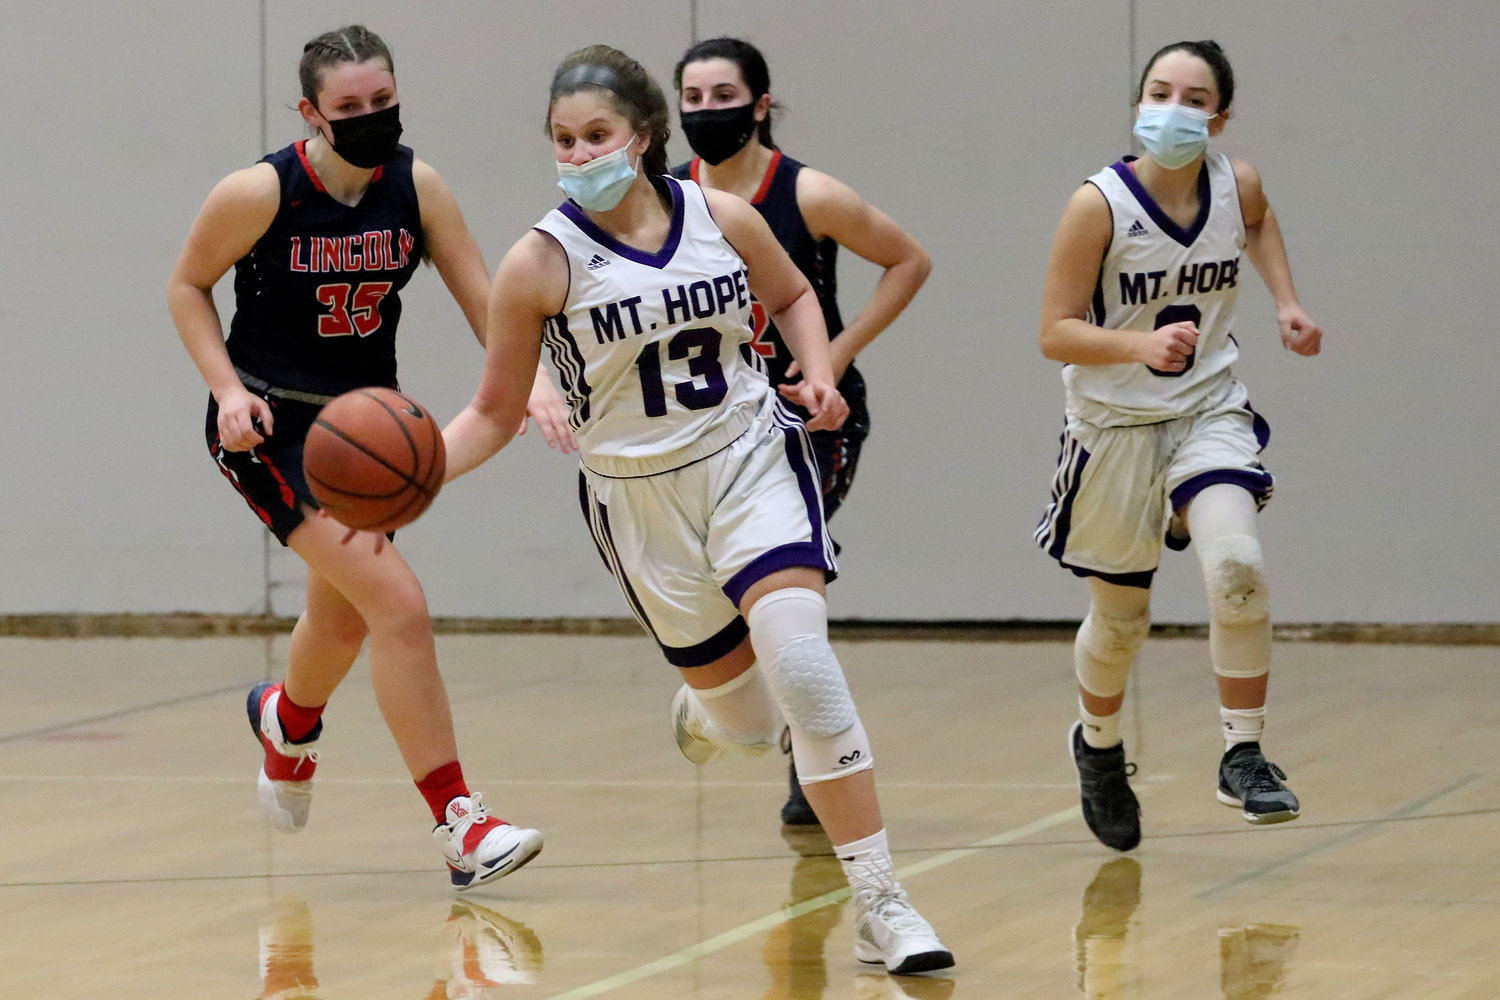 Sophomore point guard Abby Razzino dribbles up court on a fast break in the third quarter with Isabel Savinon (right).